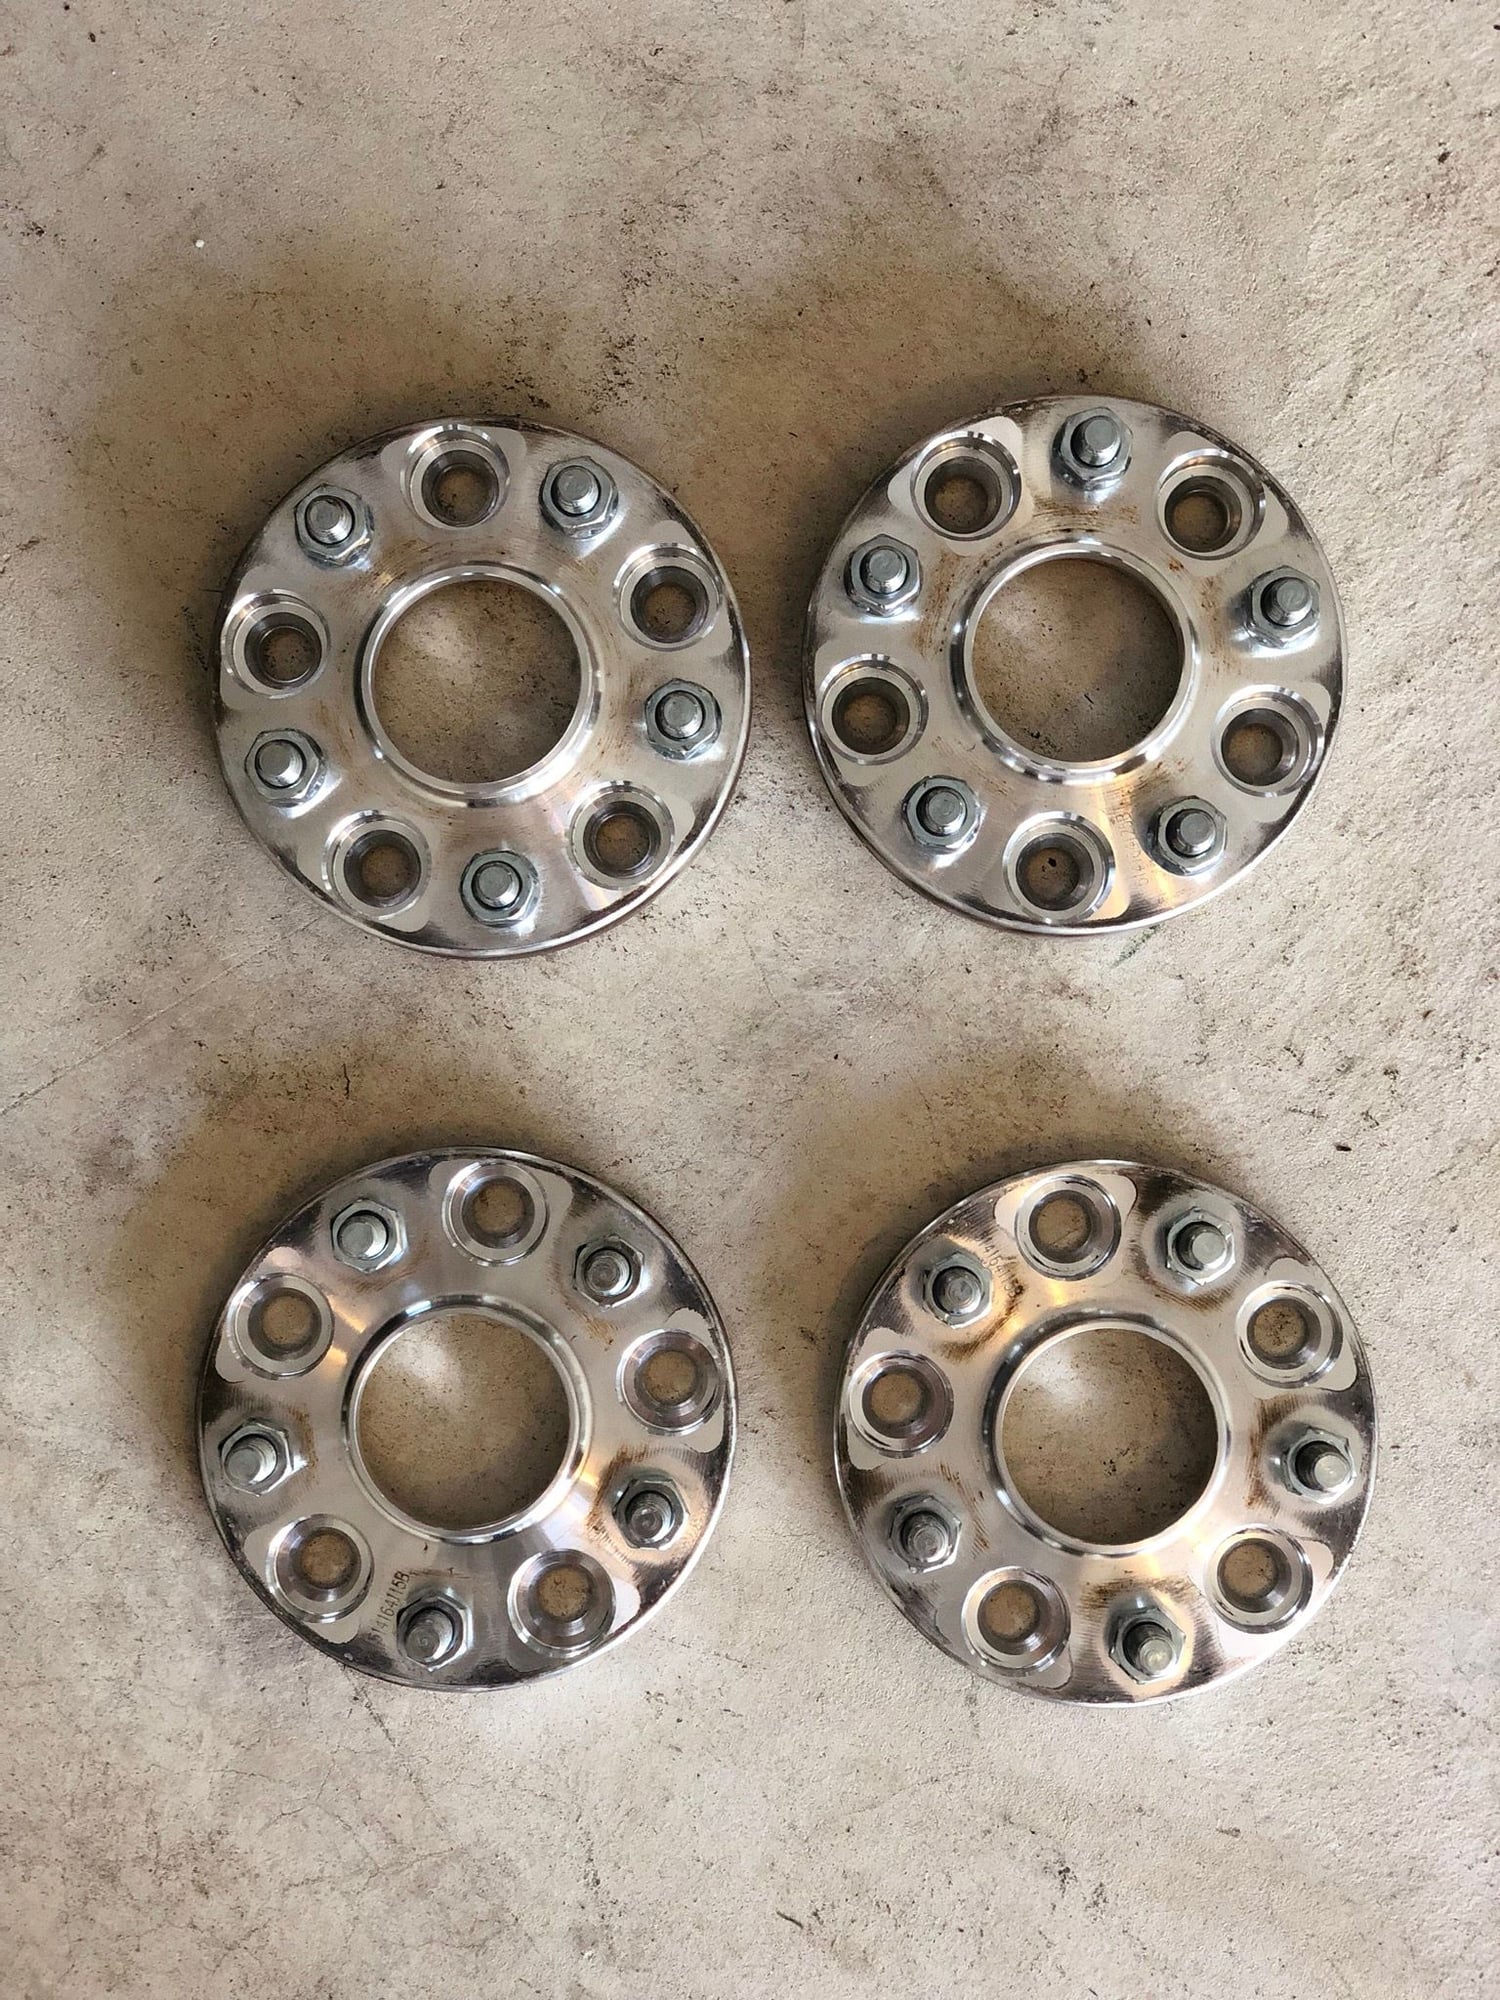 Miscellaneous - FS: 2 - 15mm and 2 - 25mm 5x114.3 hubcentric spacers - Used - 2015 to 2019 Acura TLX - Sicklerville, NJ 08081, United States